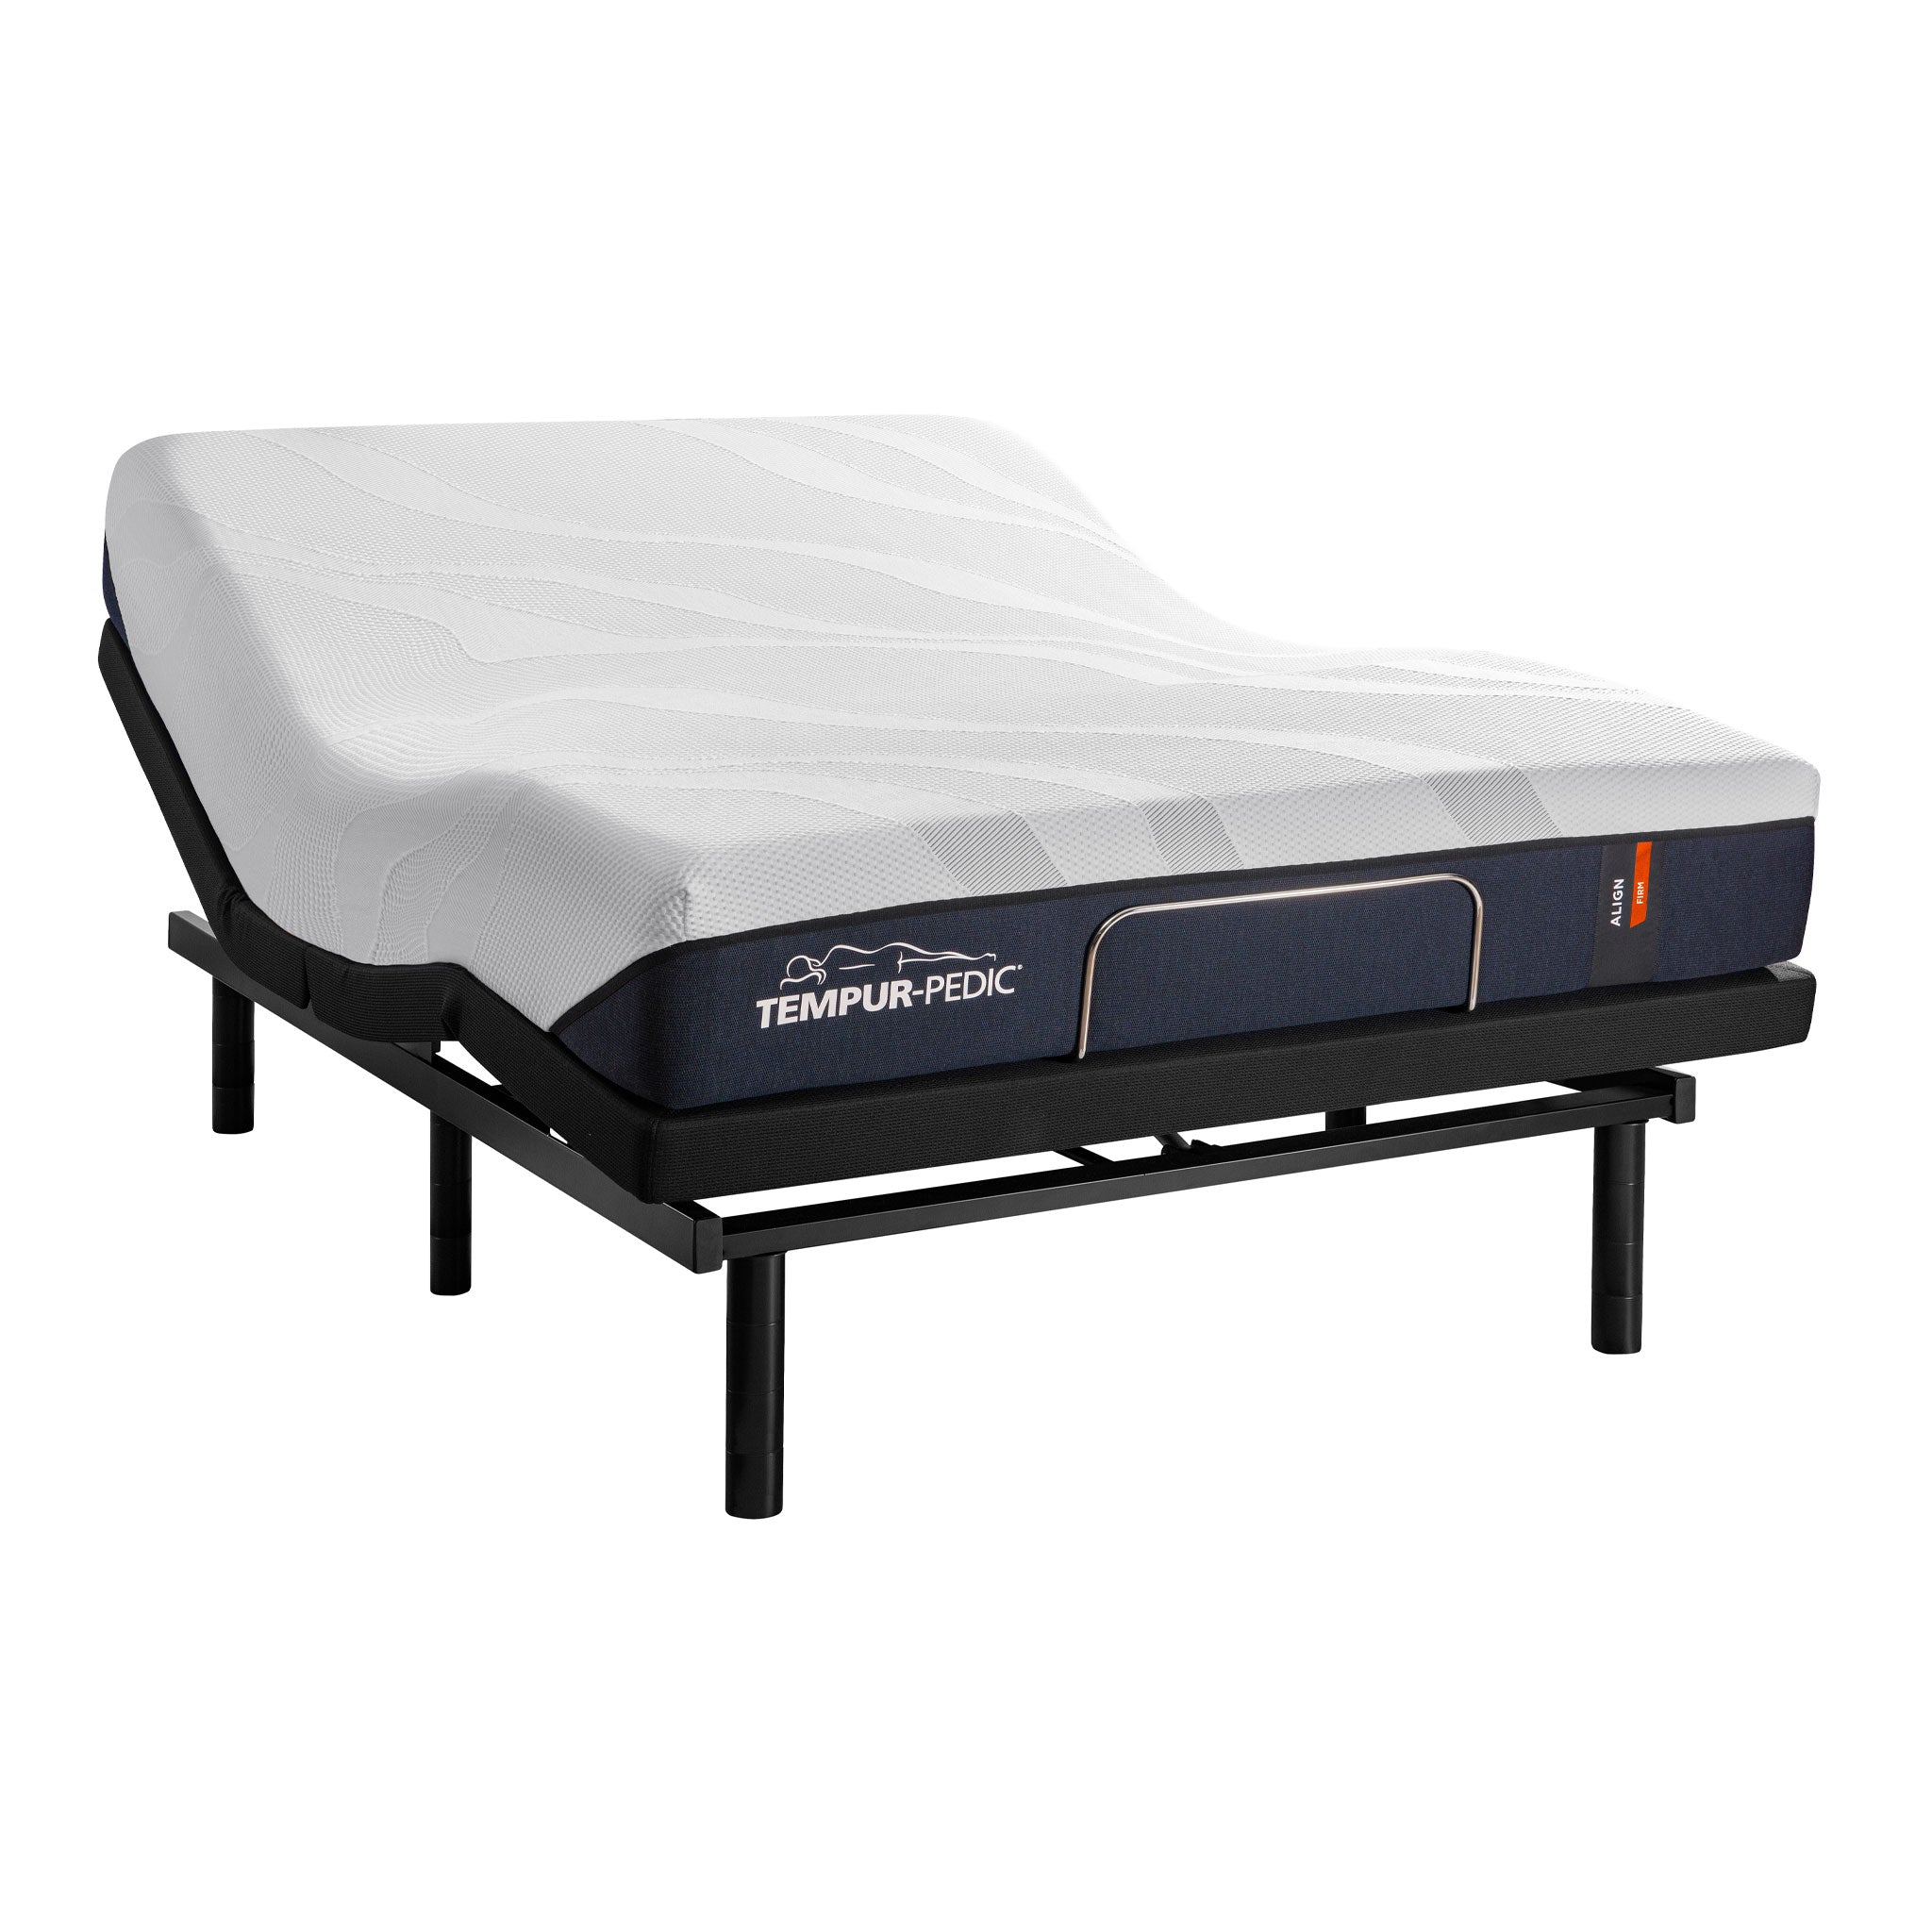 Reflexion Boost 2.0 Adjustable Bed Base by Sealy